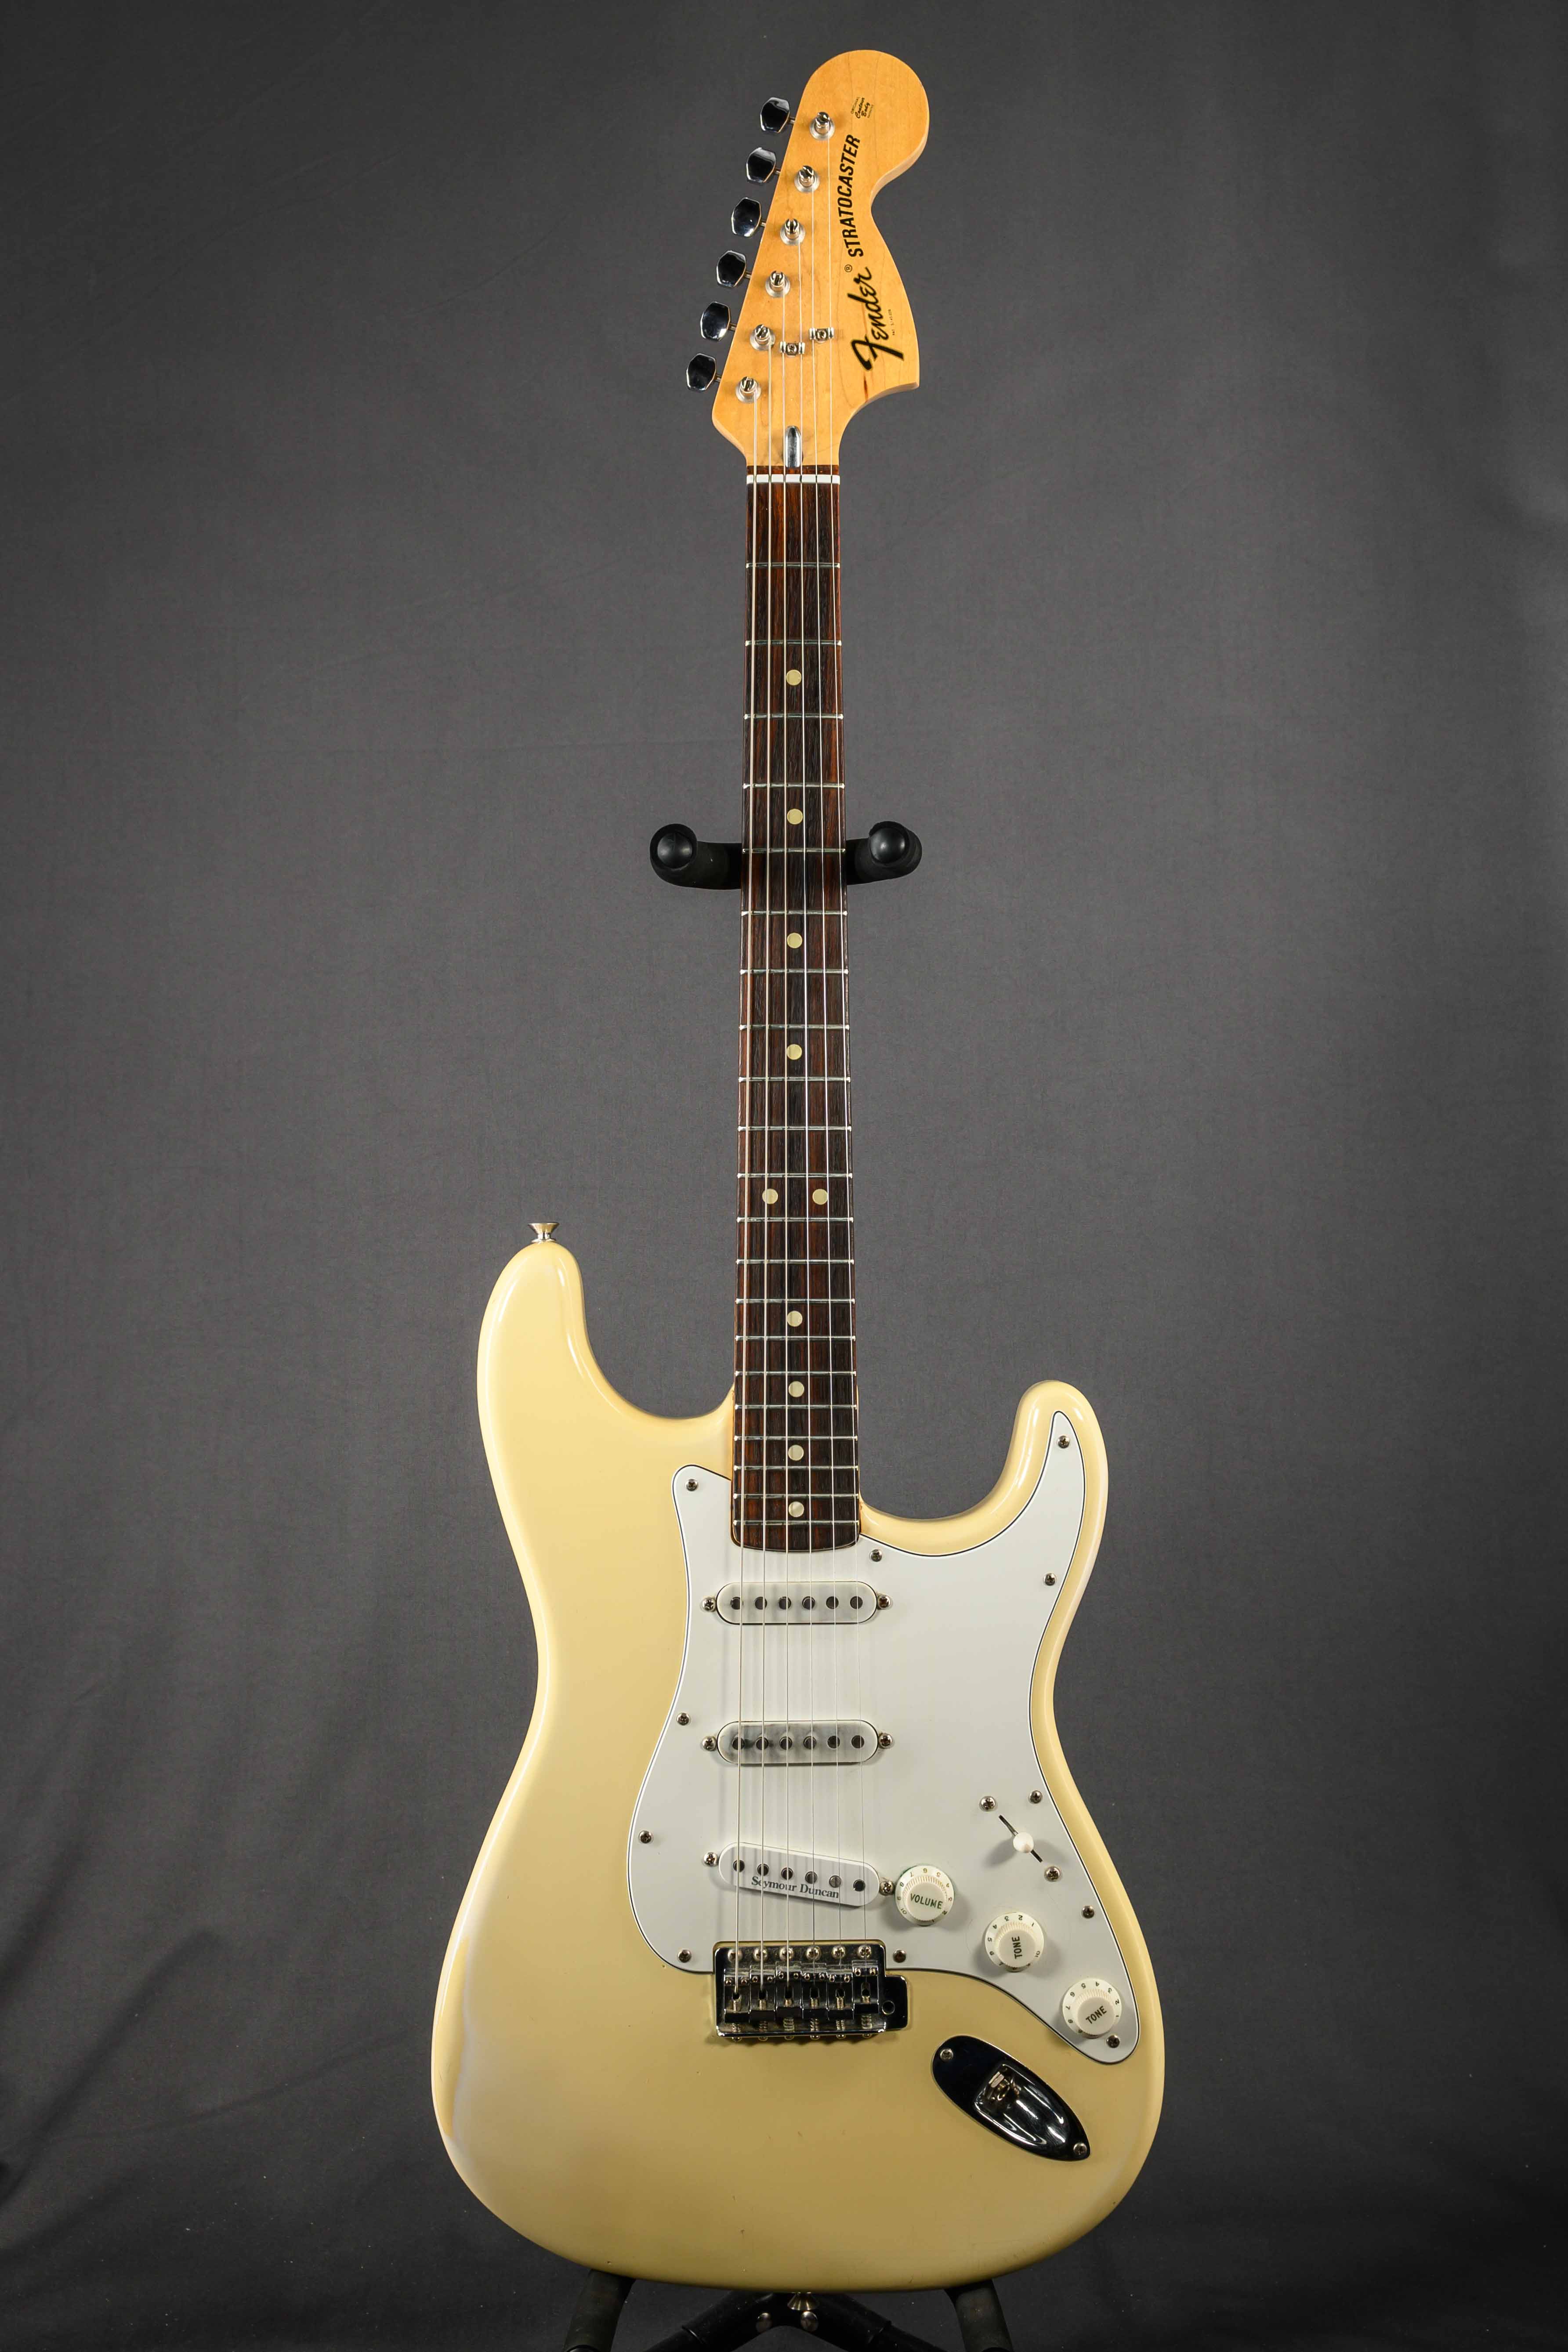 1974 Stratocaster - "Butter" Olympic White